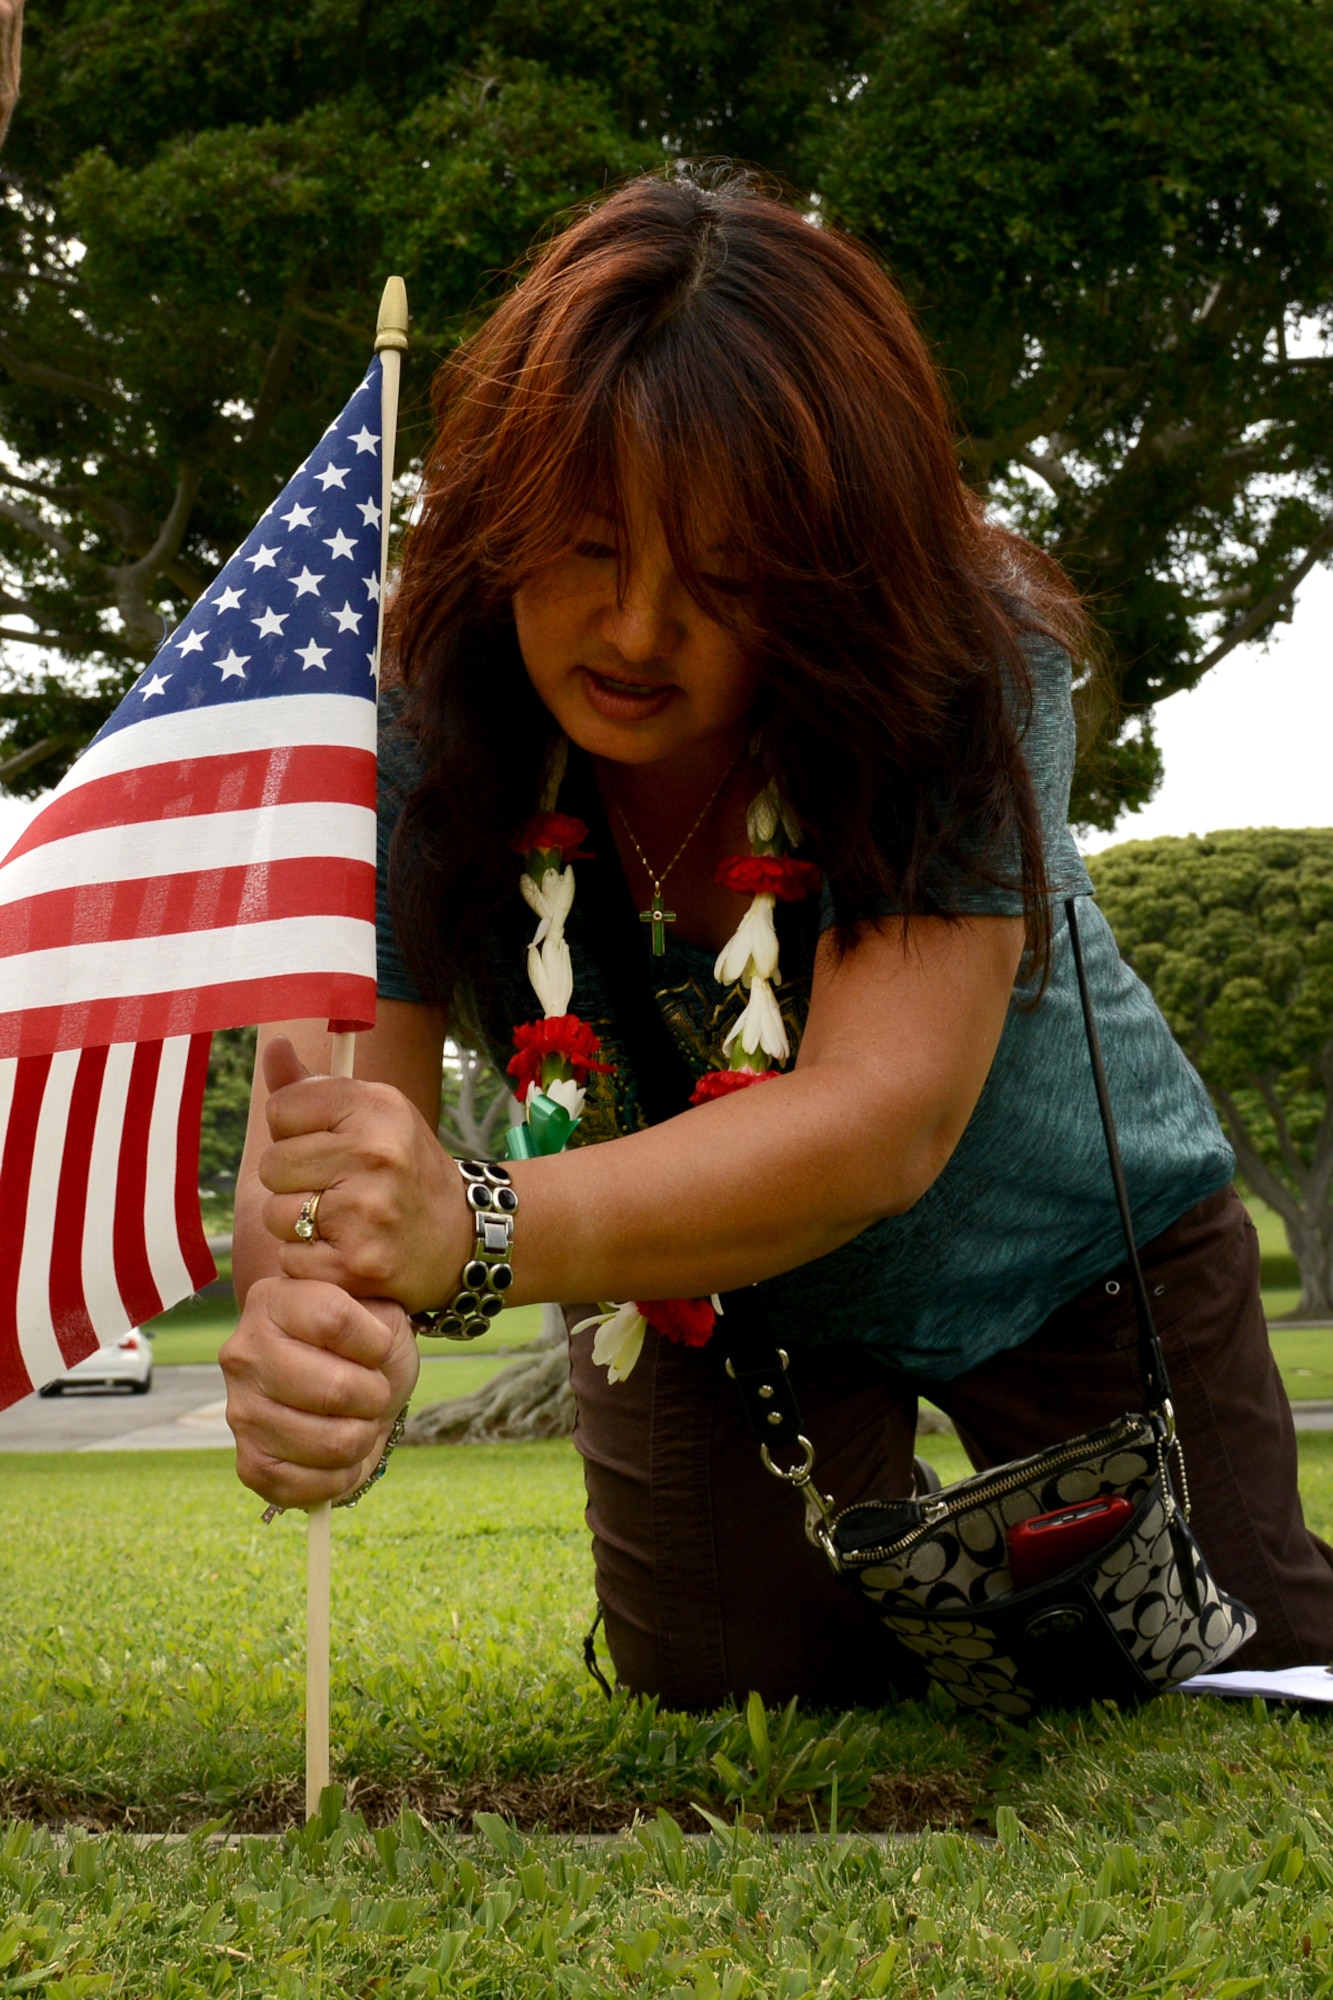 Jessie Higa, volunteer historian and president of the Hickam History Club, places a flag at a headstone Dec. 2, 2012, at the National Cemetery of the Pacific, at Punchbowl in Honolulu, to honor the men who were killed in the Dec. 7, 1941 attacks on Oahu. She directed 10 volunteers to place 92 flags and leis at each of the gravesites of the Hickam Field Army Air Forces Airmen who were killed, including the unknown sites identified as a Hickam Filed casualty. Higa and a team of teenagers from a local school started placing flags last year as a community service project. (U.S. Air Force photo/Staff Sgt. Mike Meares)